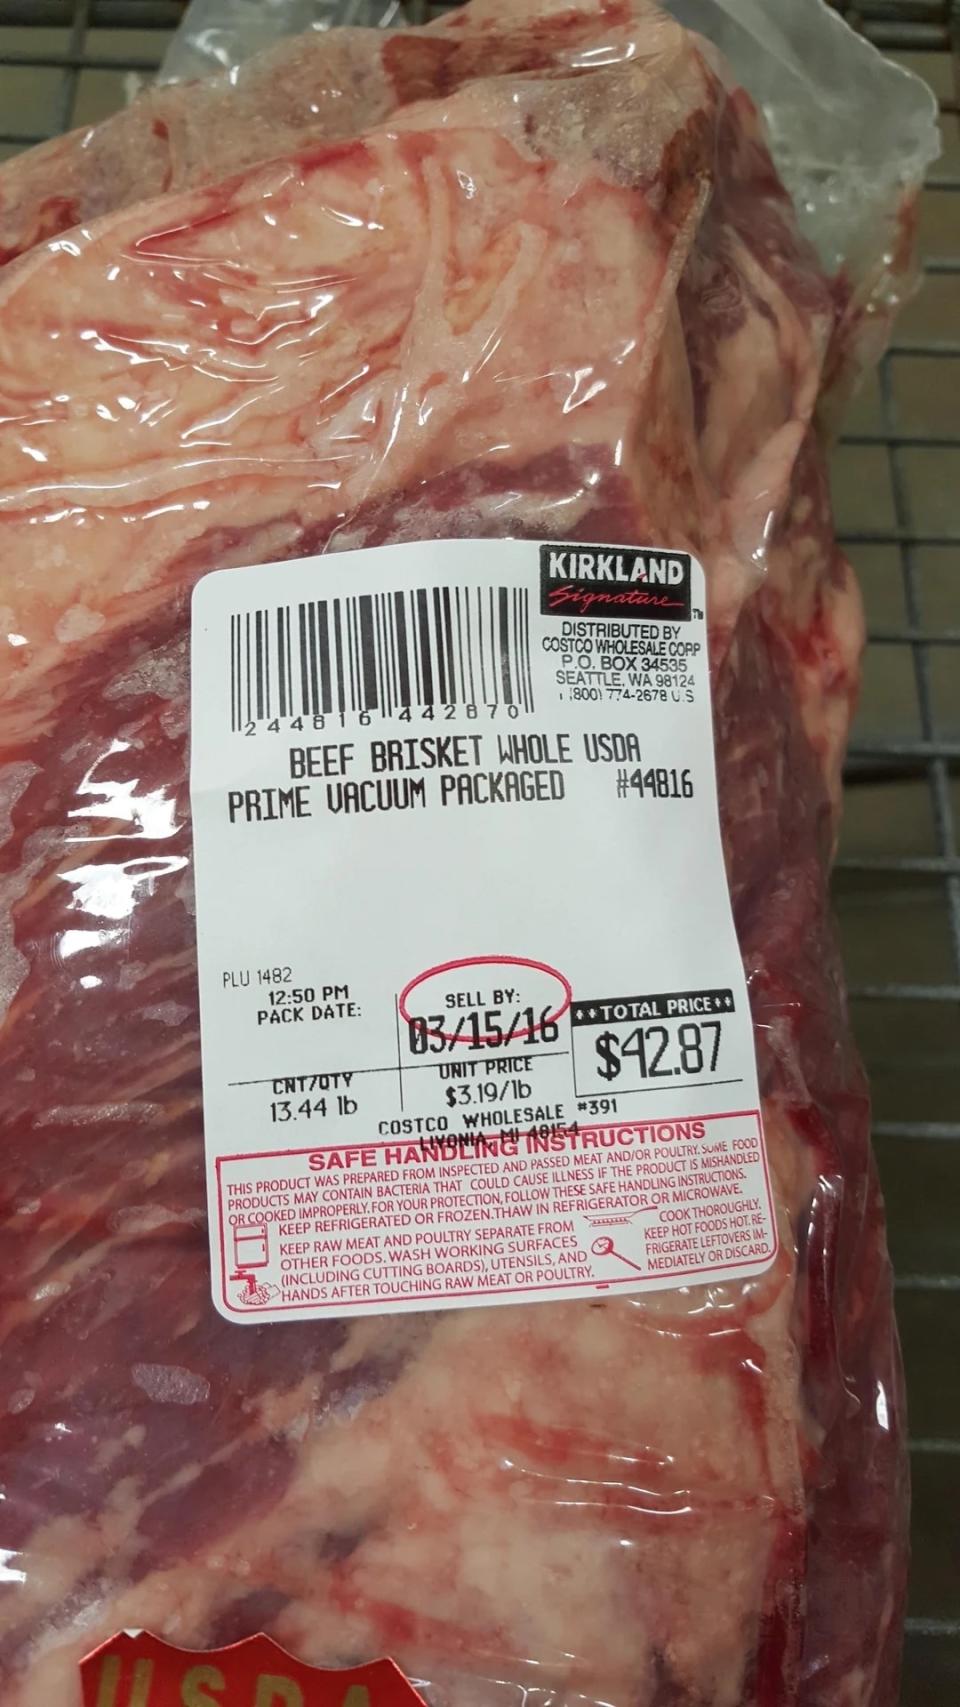 Packaged Kirkland beef brisket with price and best before label indicating it is USDA Choice